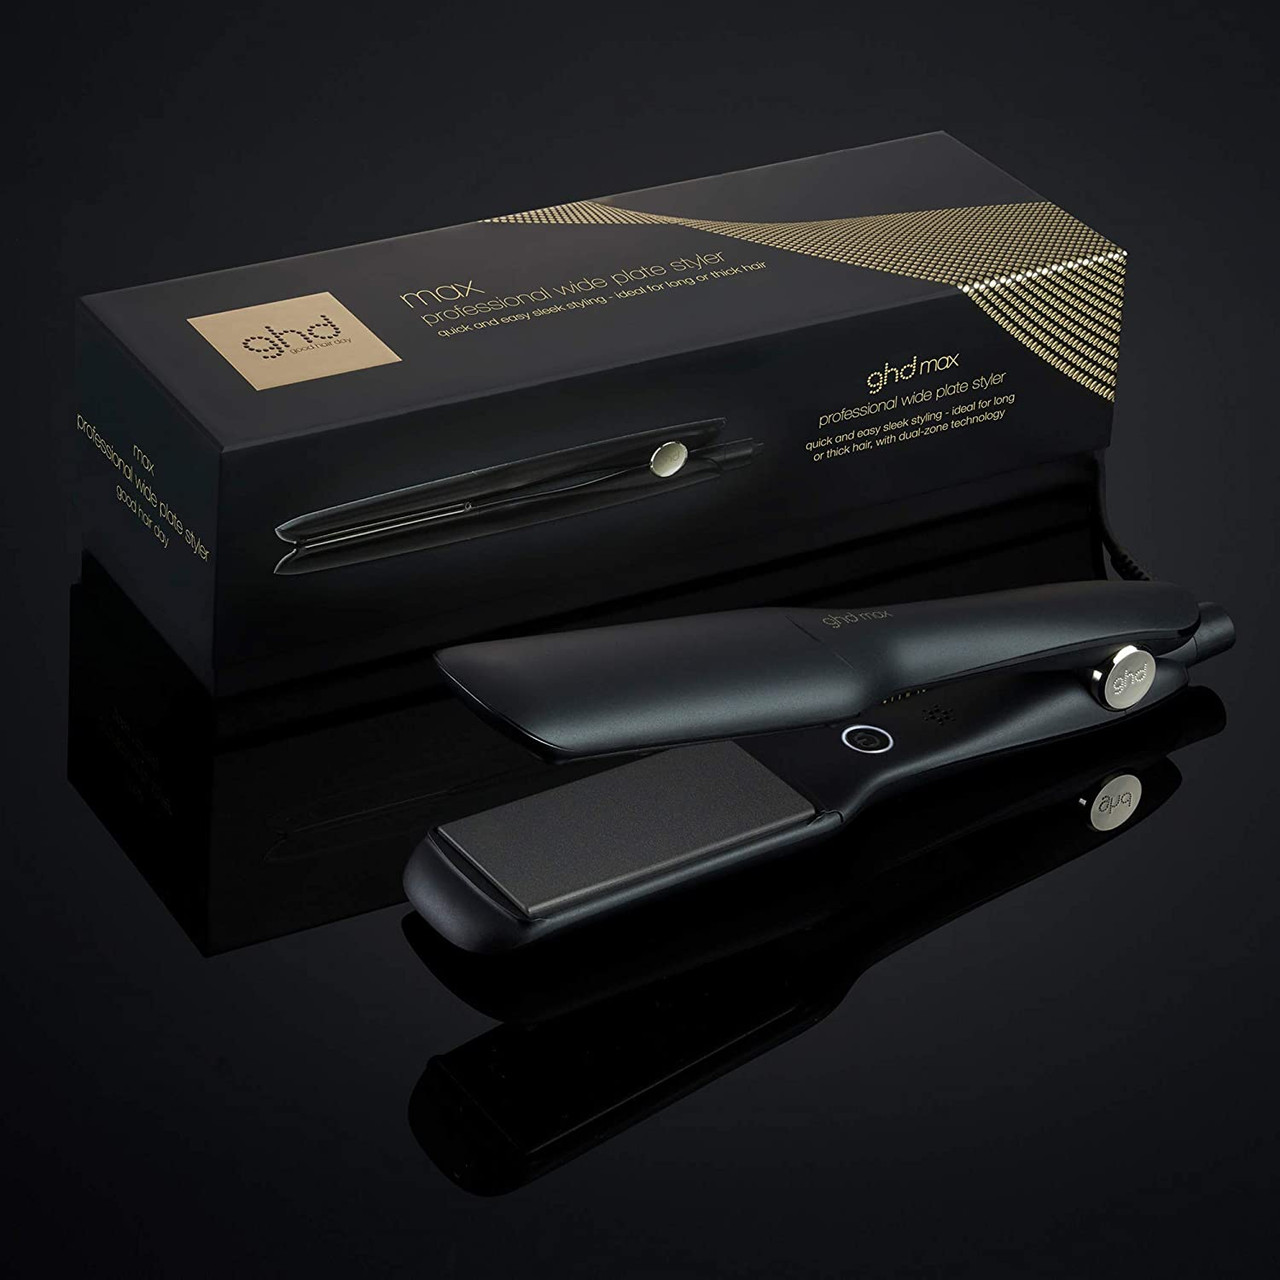 ghd Max Hair Straightener  Beauty South Africa